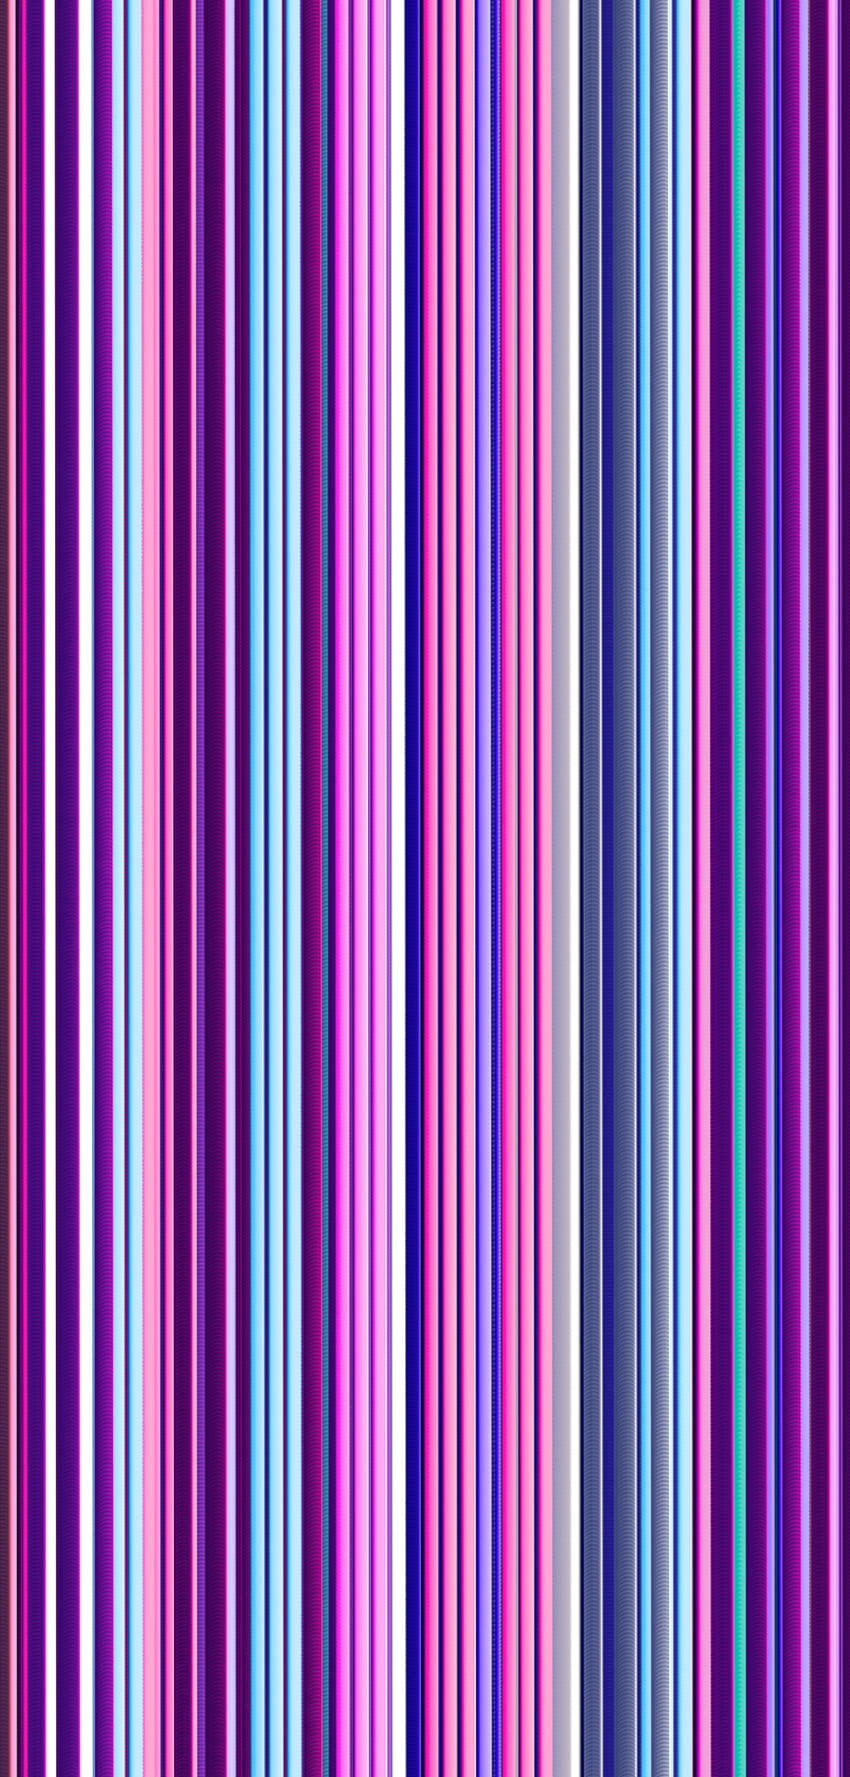 iStripe, awesome, striped, minimal, cool, purple, lines, colorful HD phone wallpaper